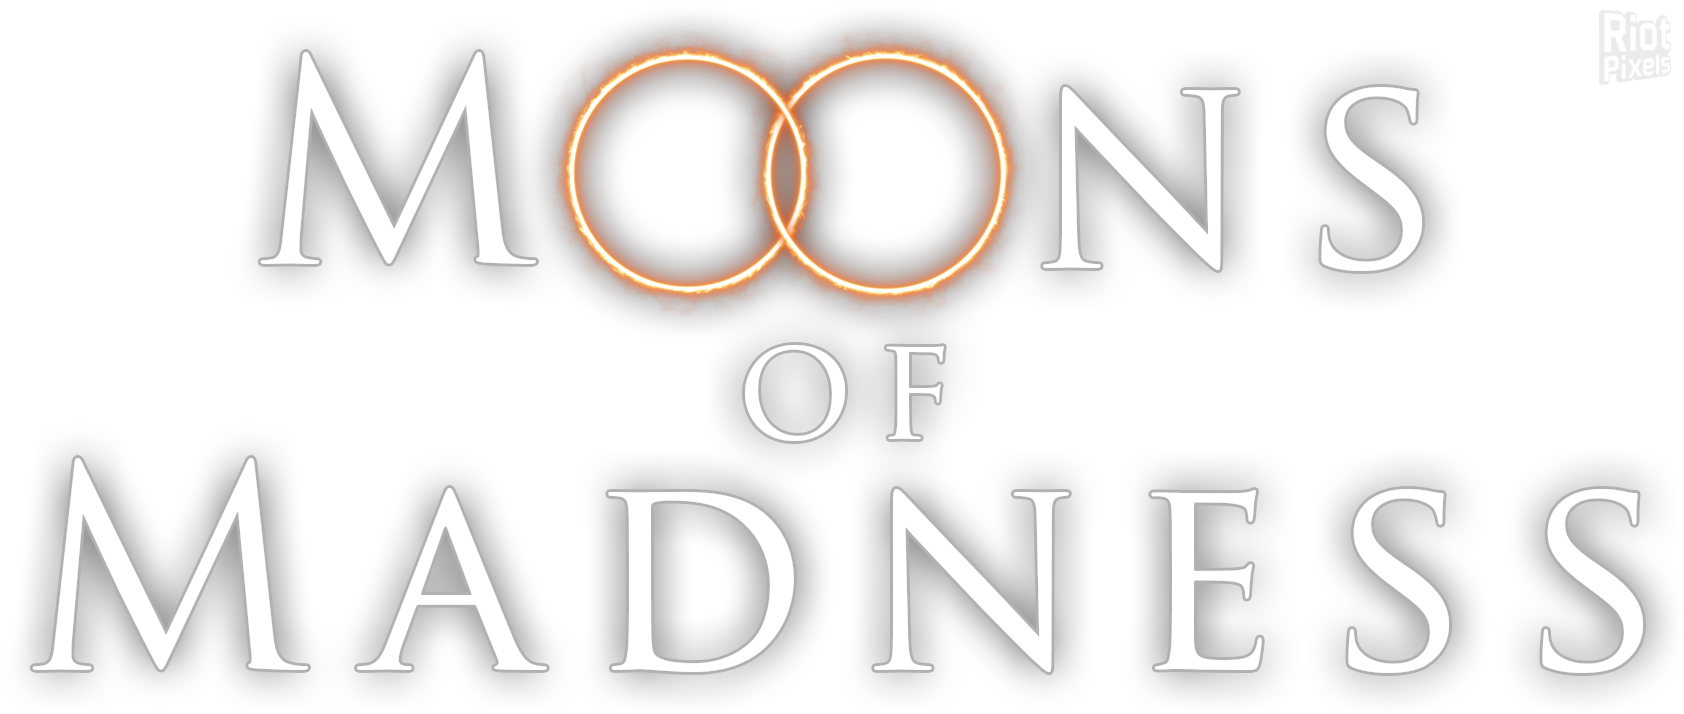 moons of madness rock pocket games